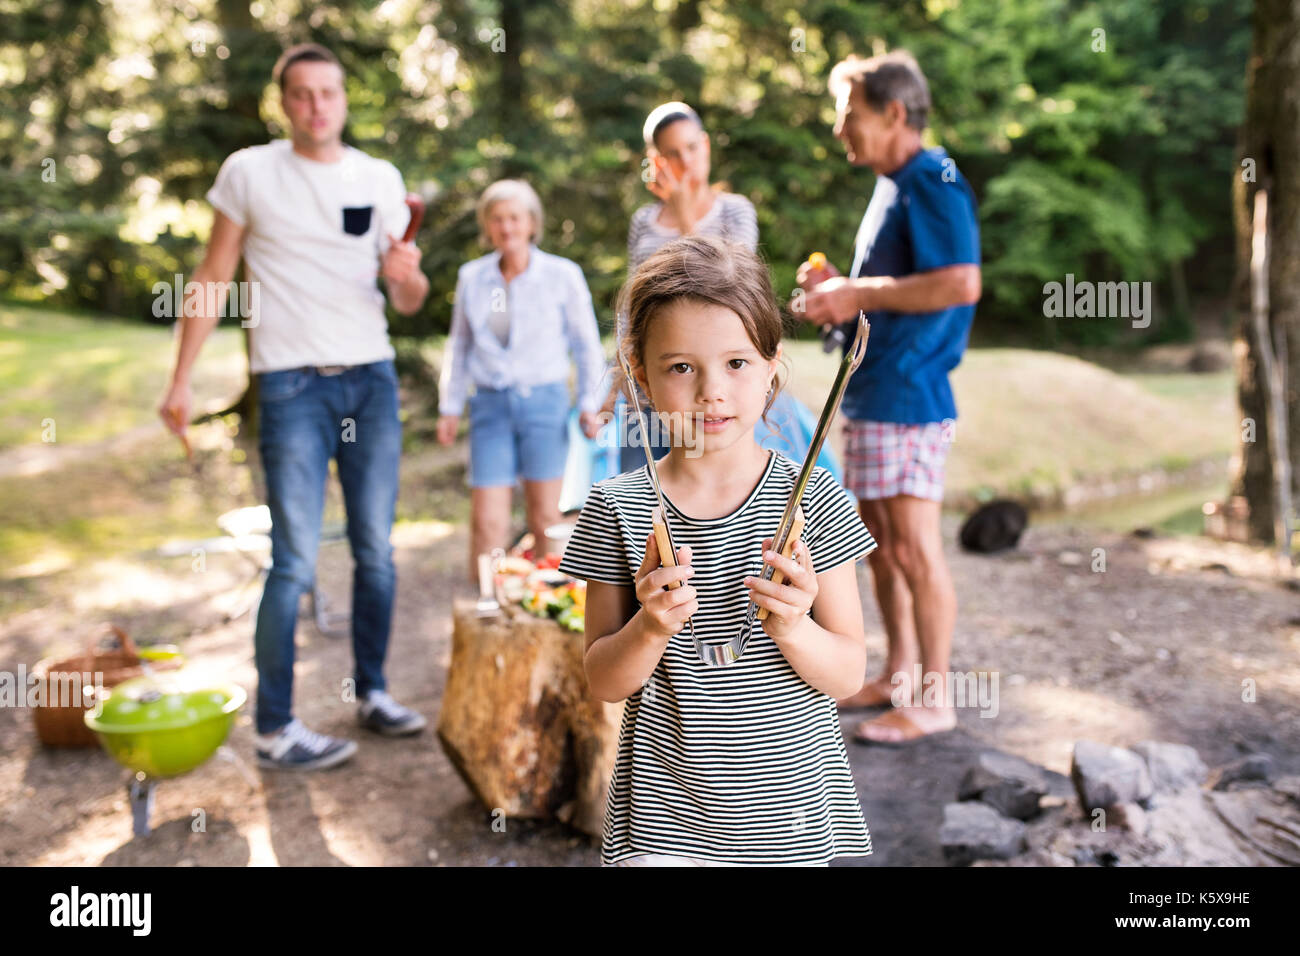 Beautiful family camping in forest, eating together. Stock Photo